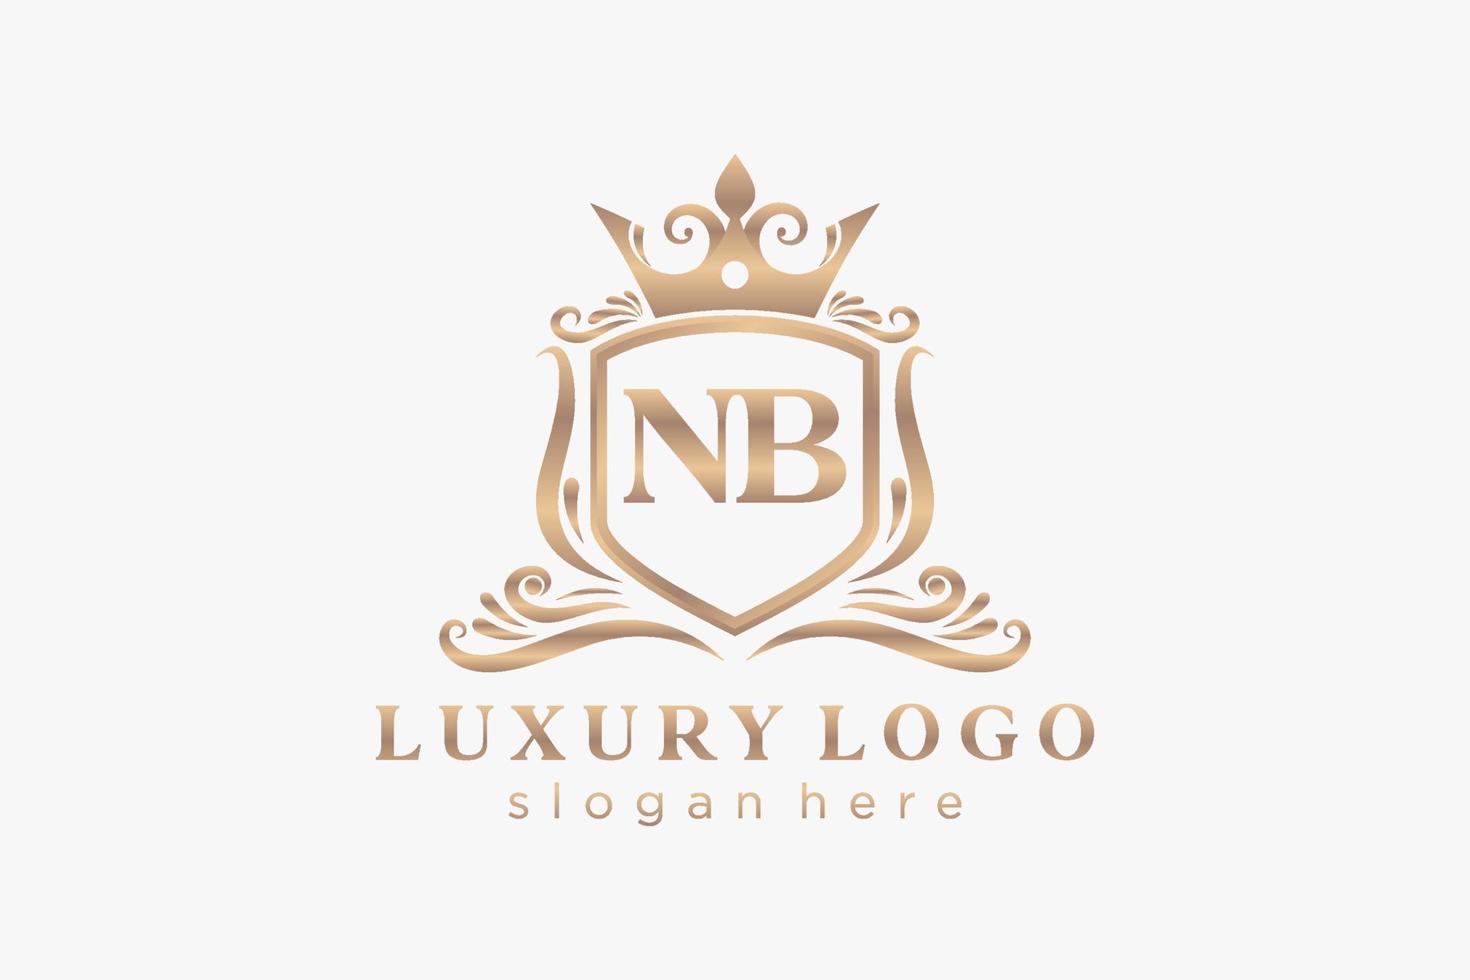 Initial NB Letter Royal Luxury Logo template in vector art for Restaurant, Royalty, Boutique, Cafe, Hotel, Heraldic, Jewelry, Fashion and other vector illustration.